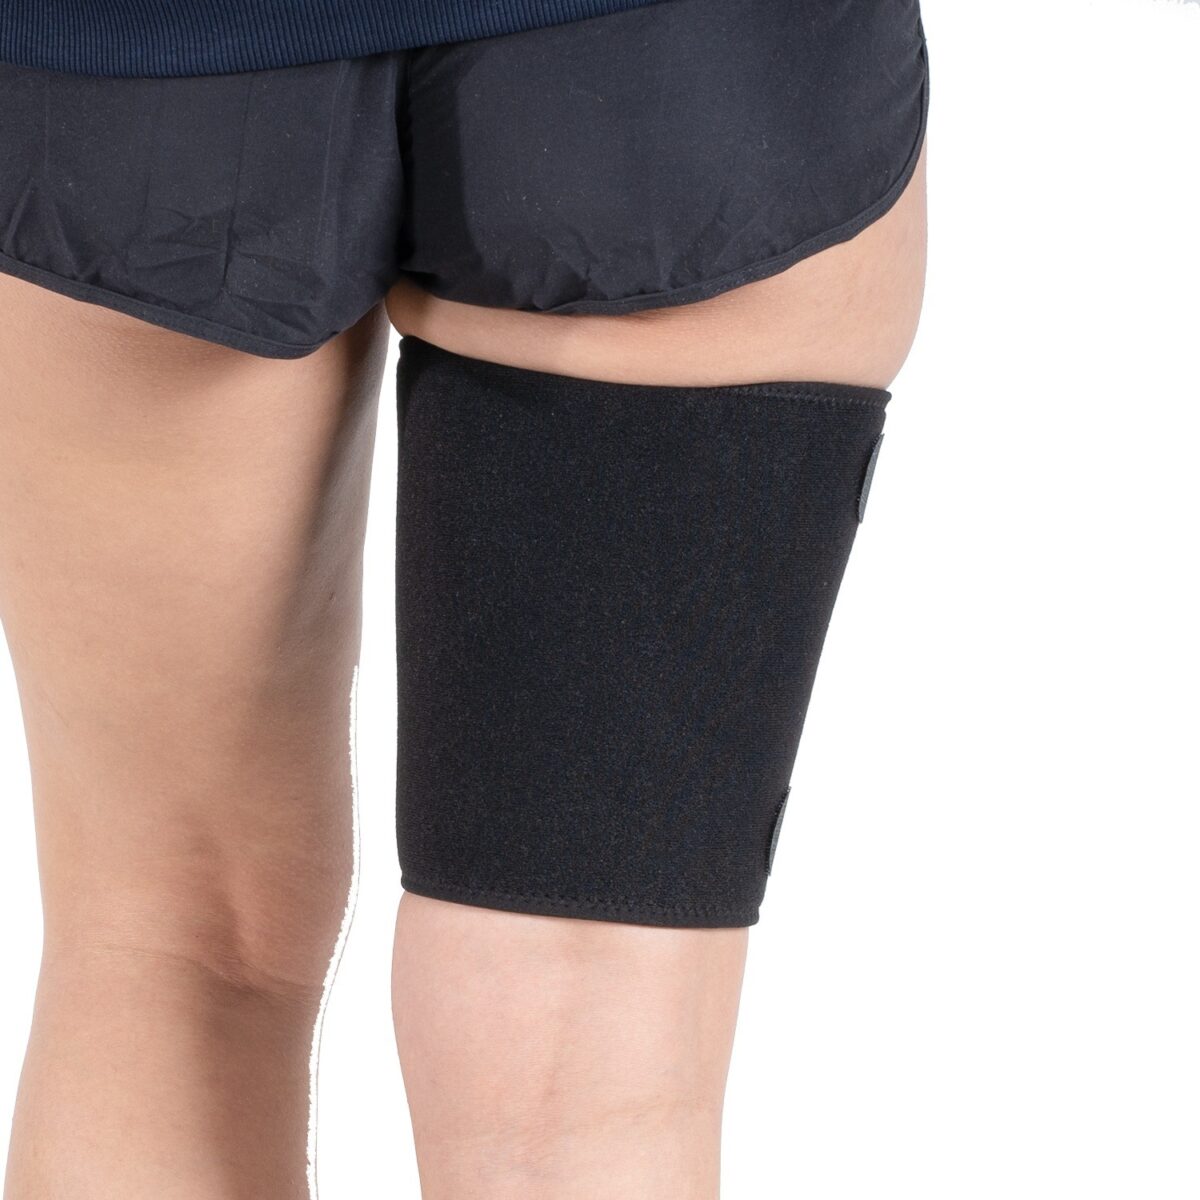 wingmed orthopedic equipments W522 thigh support 21